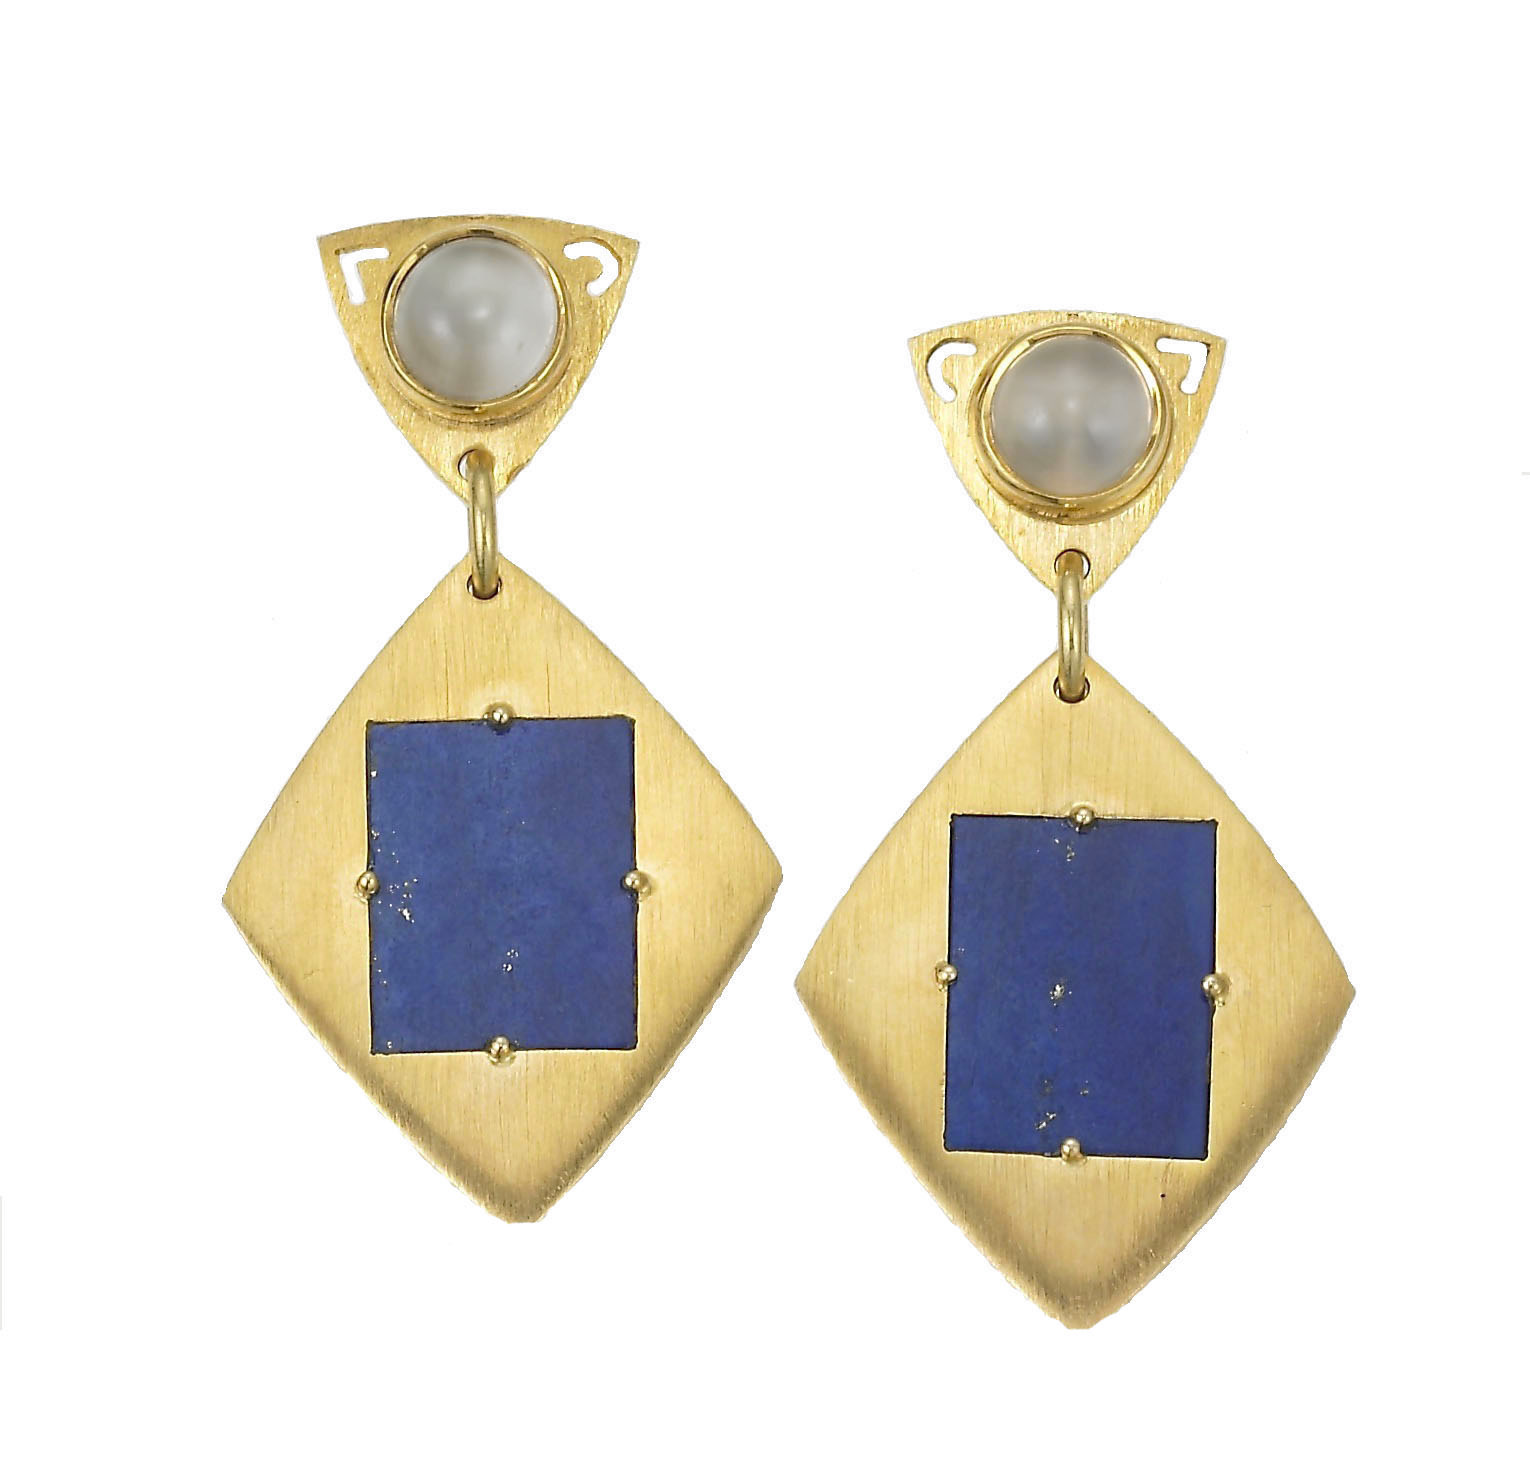 Brushed Yellow Gold and Lapis Lazuli Earrings